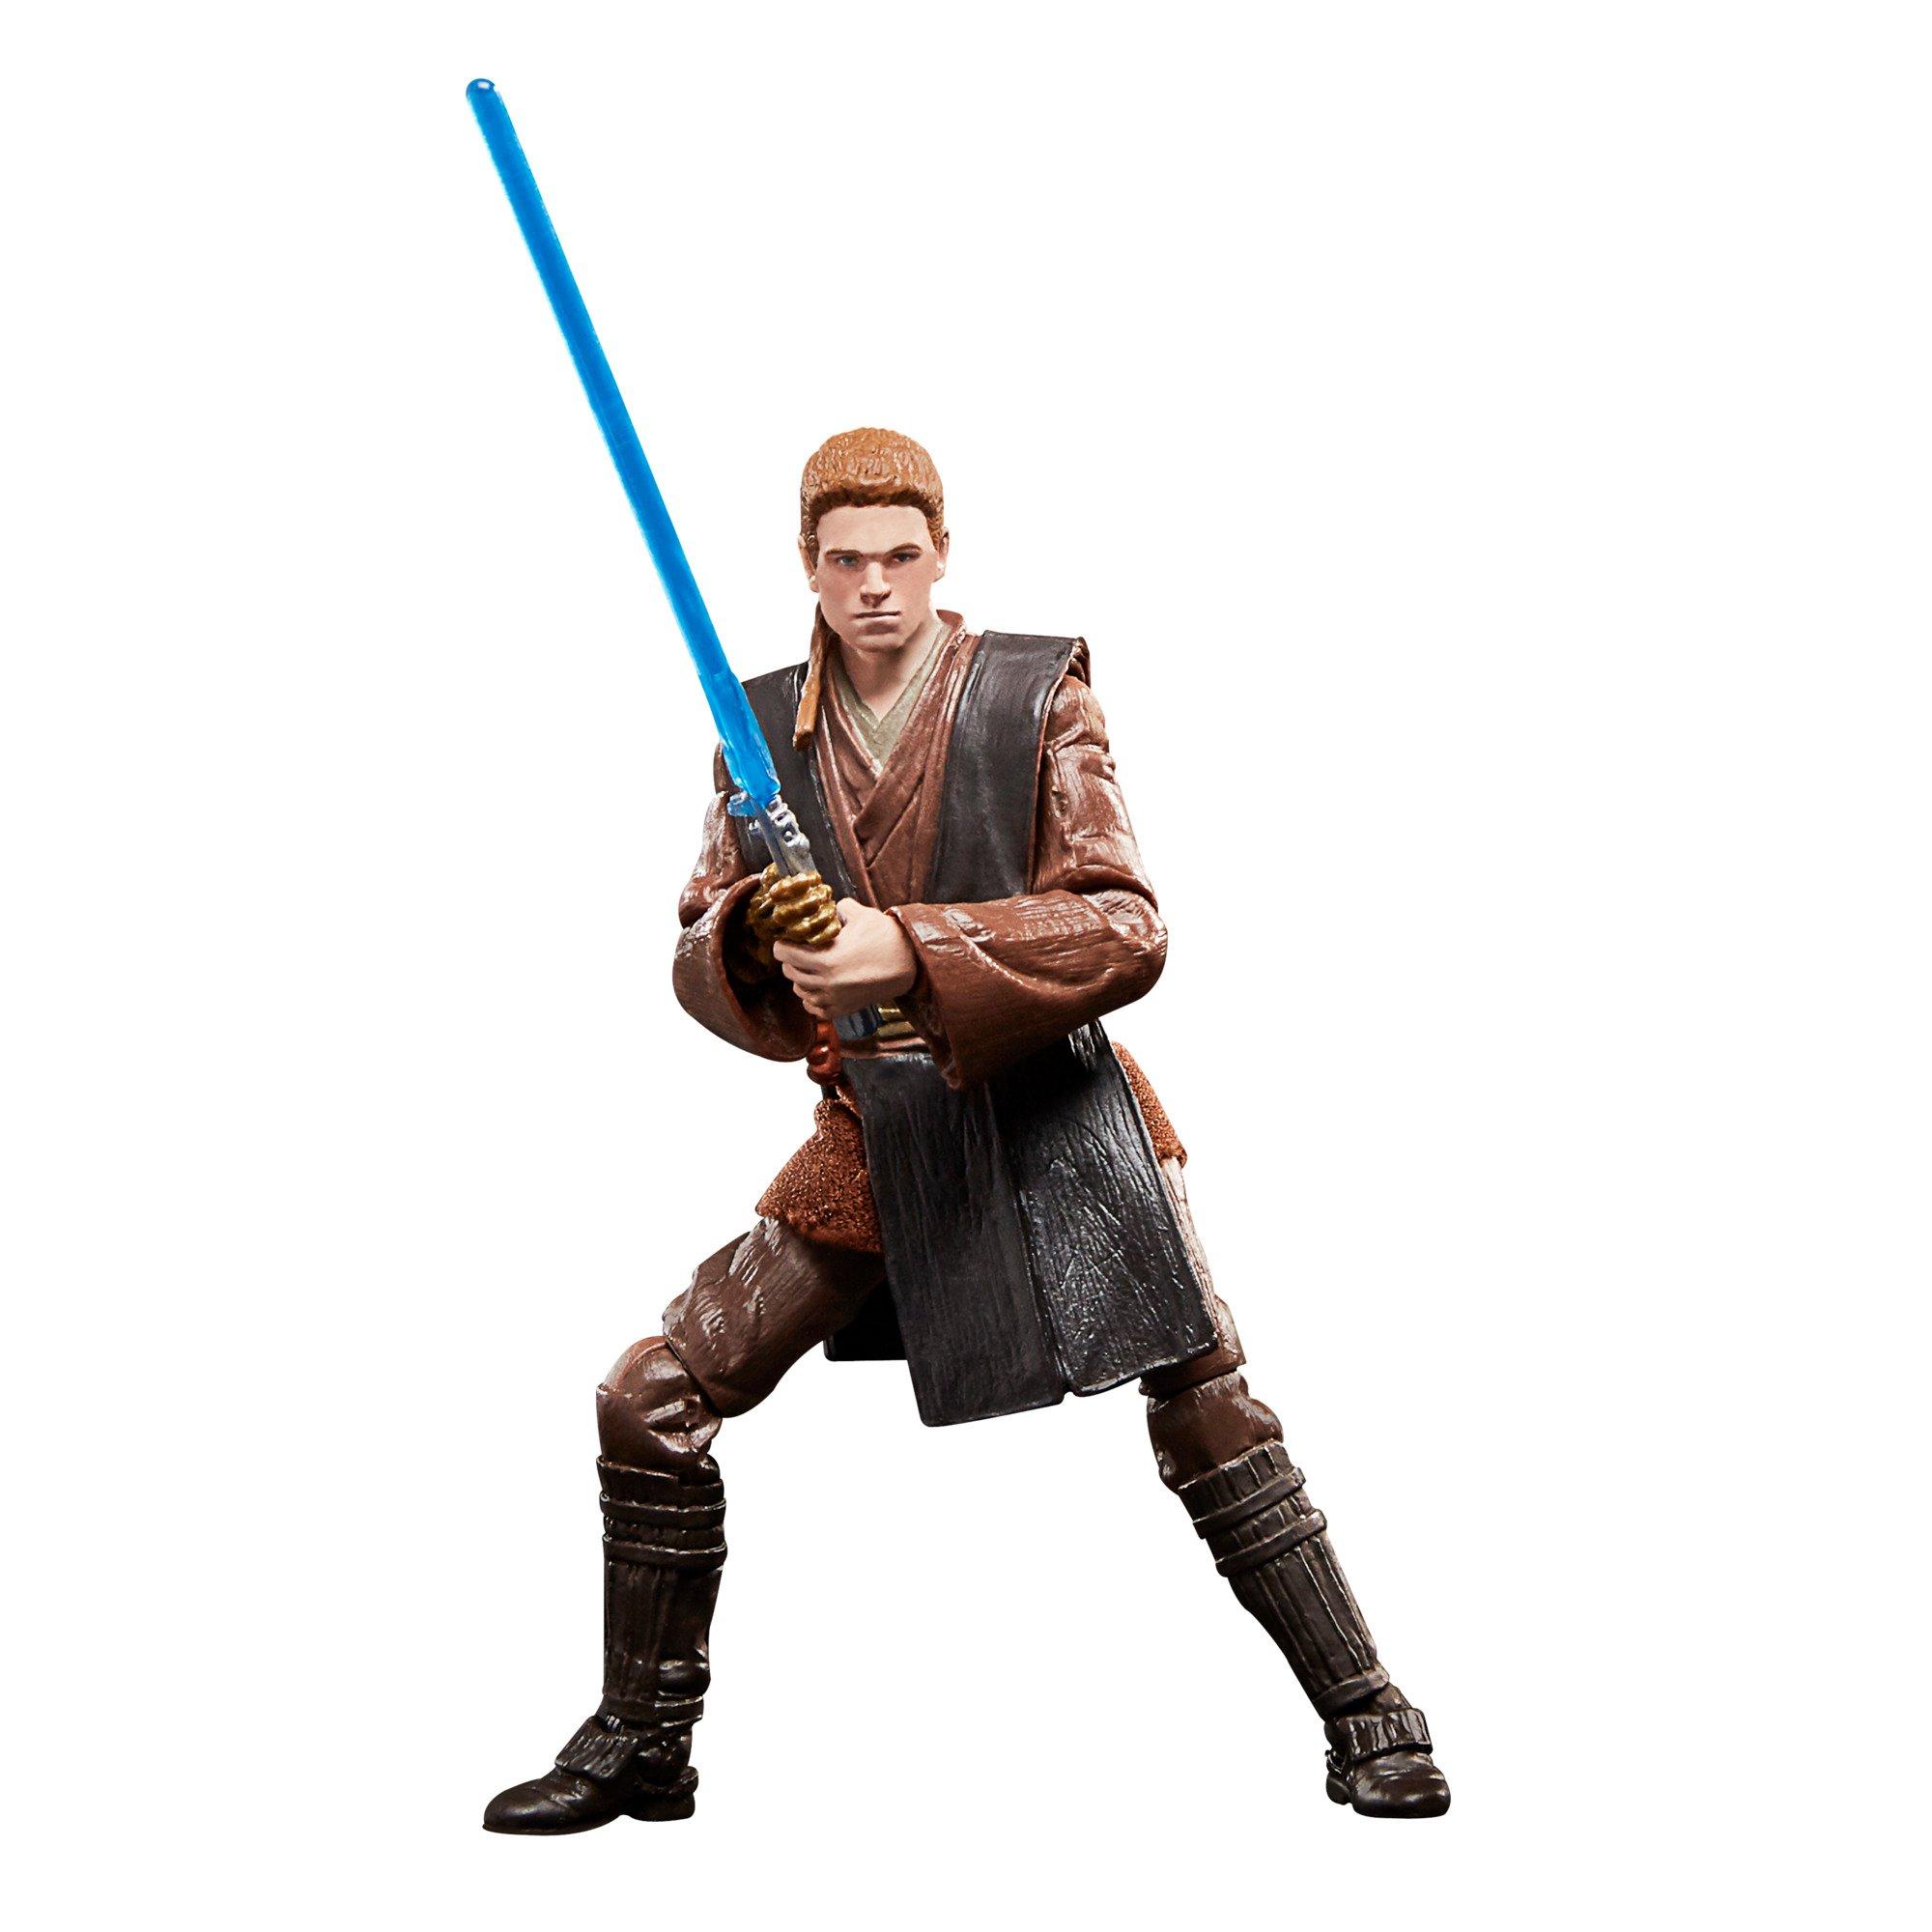 Hasbro Star Wars: The Vintage Collection Attack of the Clone Wars Anakin Skywalker (Padawan) 3.75-in Action Figure